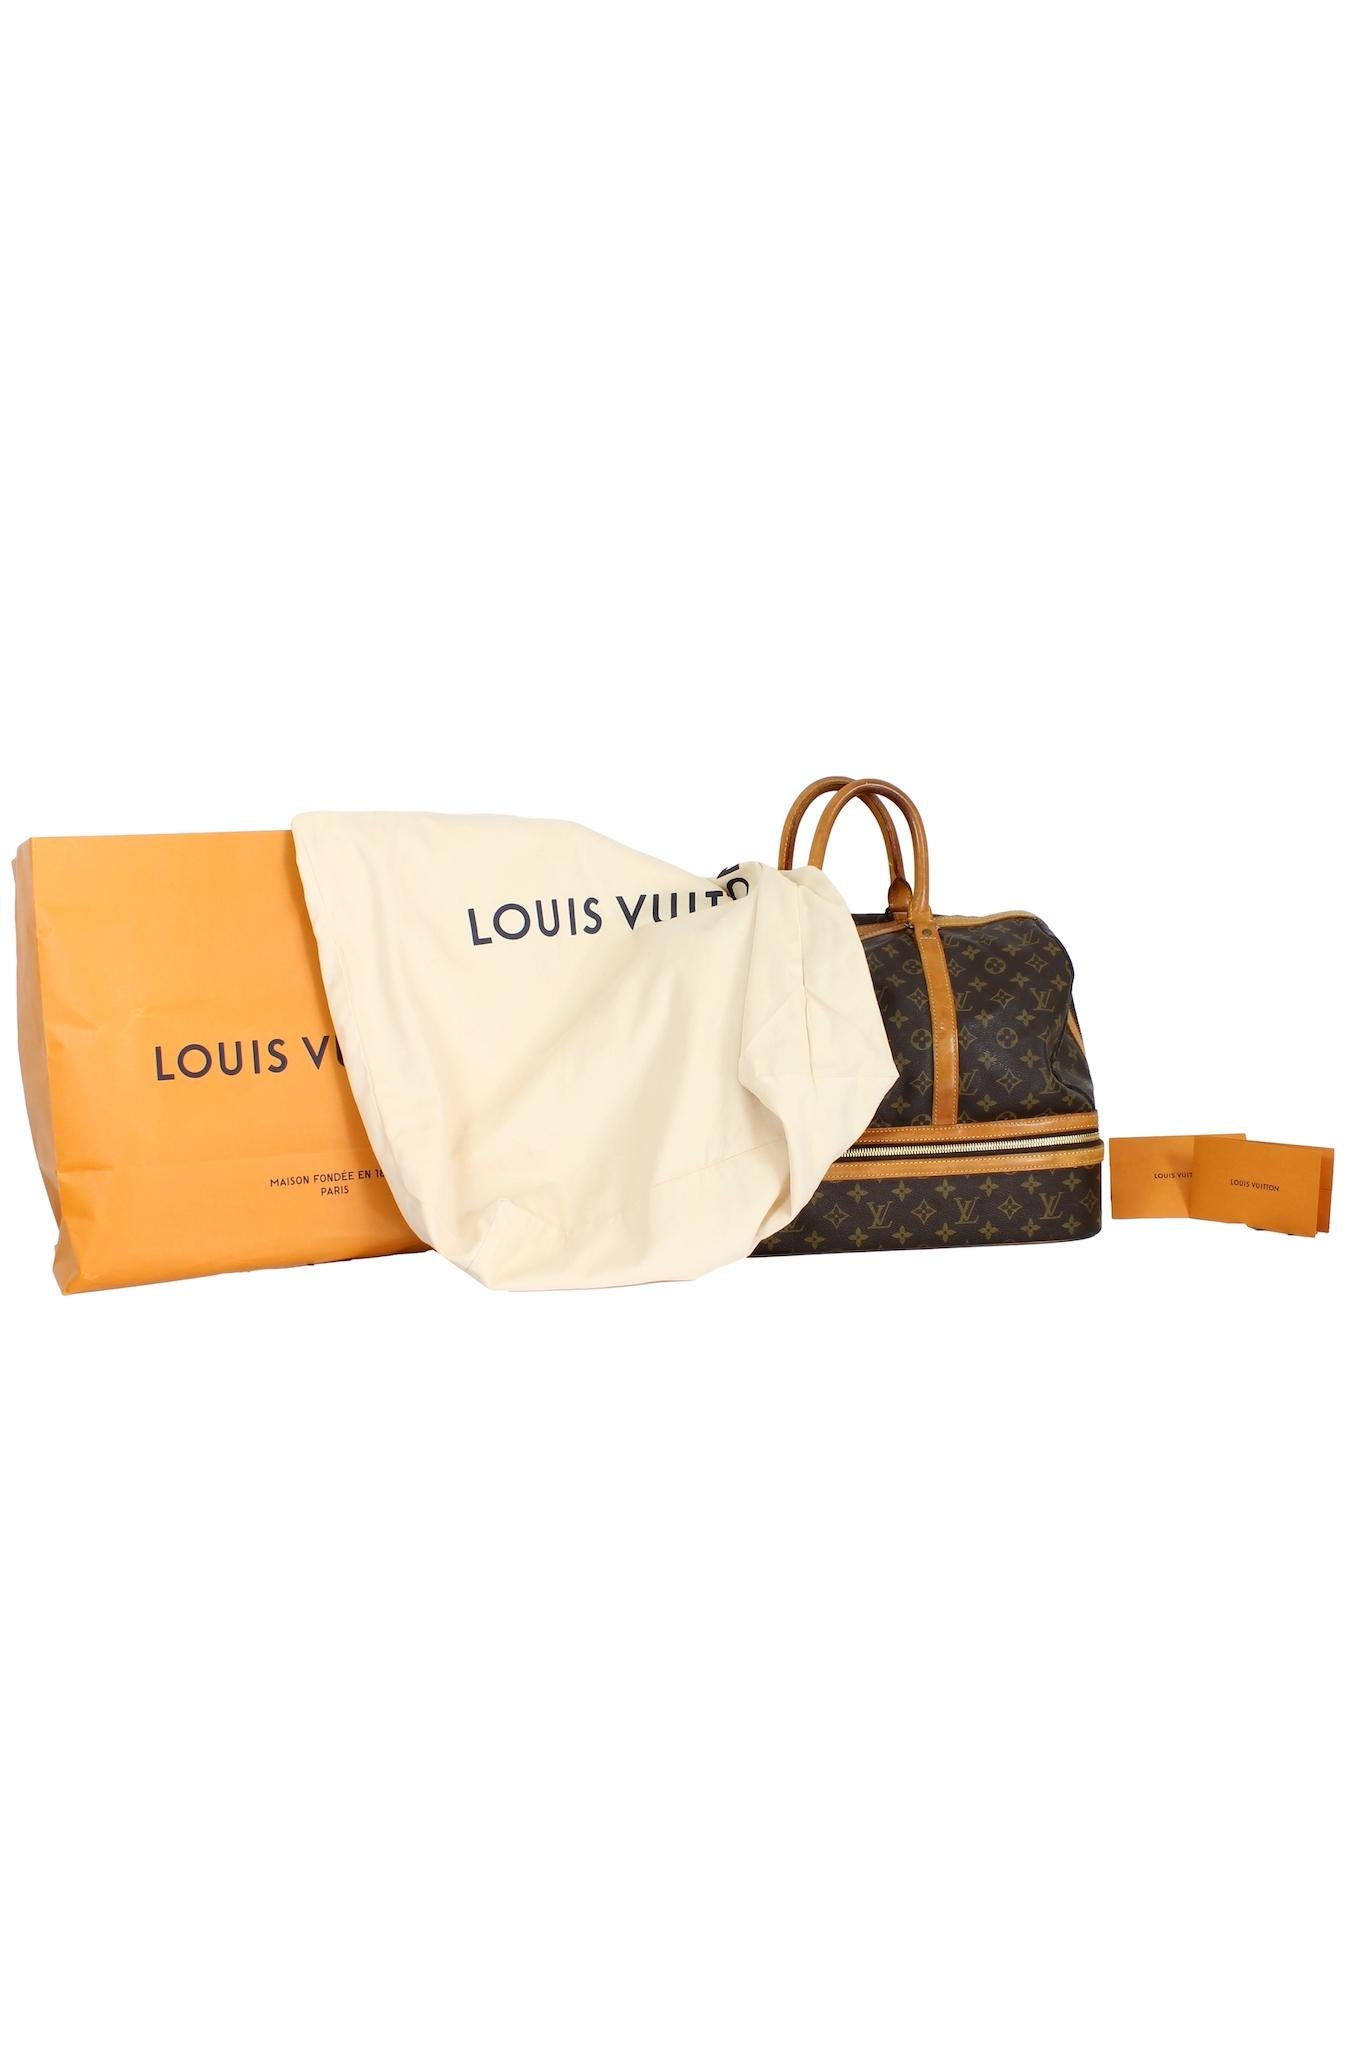 This Louis Vuitton Sac Sport Luggage Bag Monogram Vintage 1980s piece is a beautiful and timeless addition to any luxury travel collection. Original keys and lock. Made from a chic, brown monogram canvas, this piece evokes the feeling of